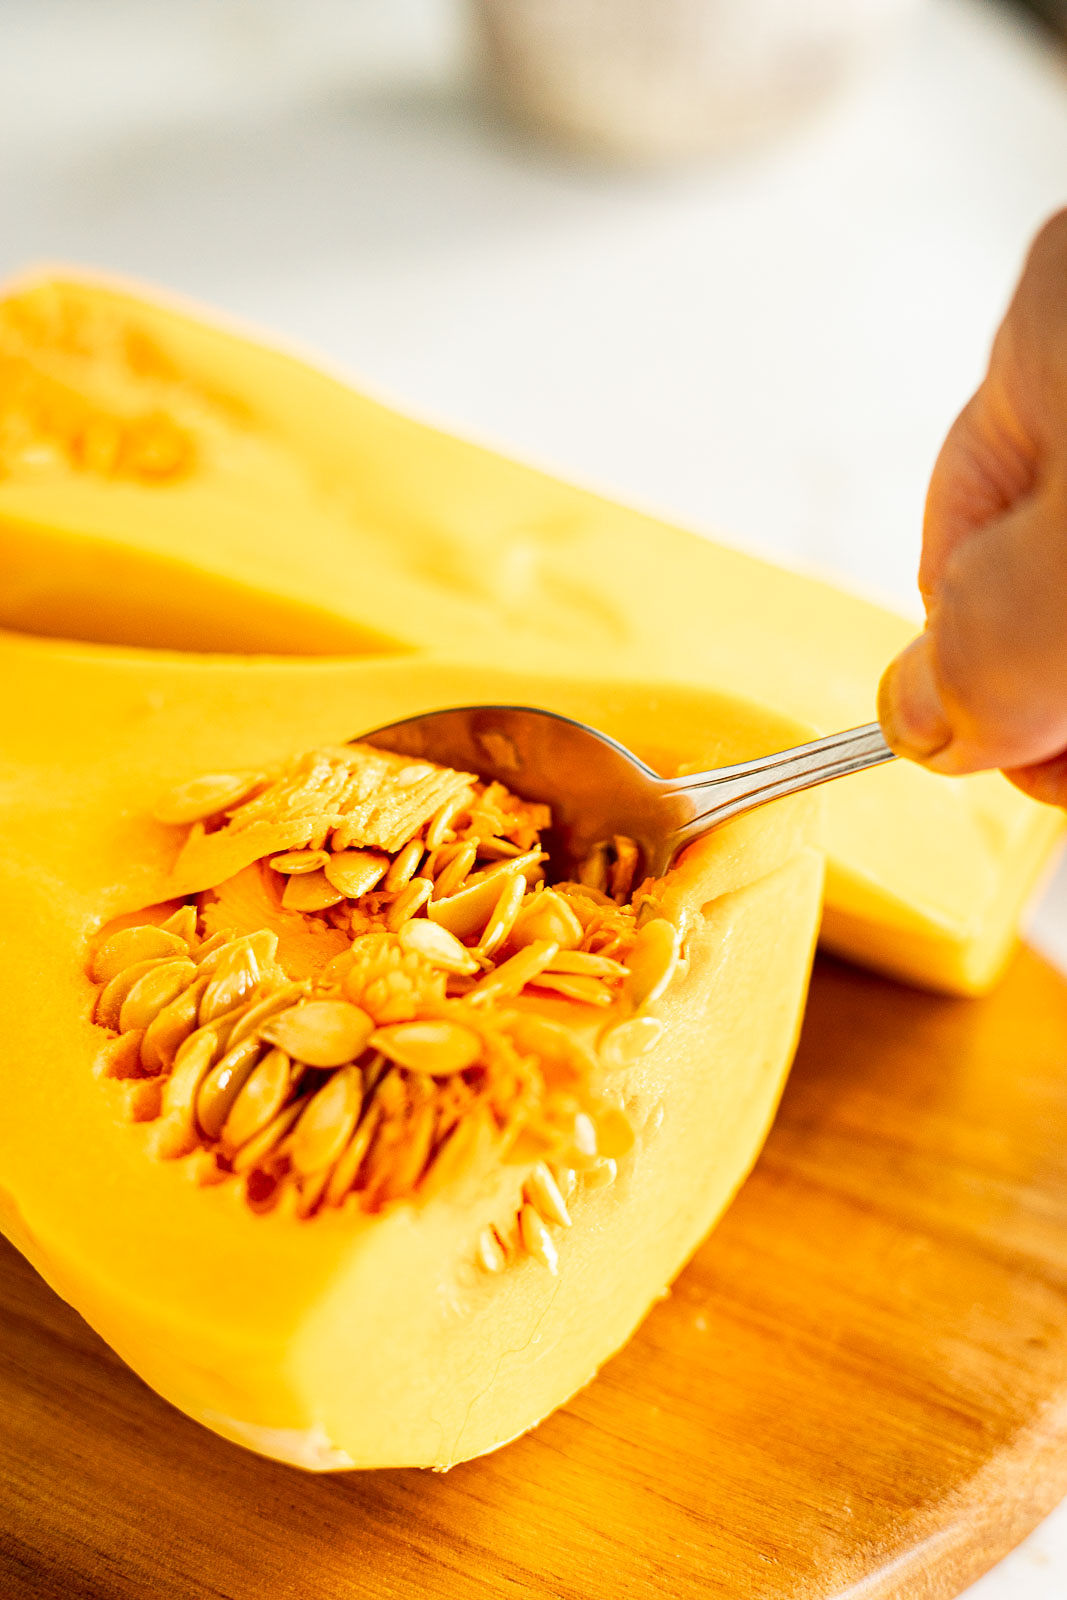 Scooping out the seeds of a butternut squash with a spoon.